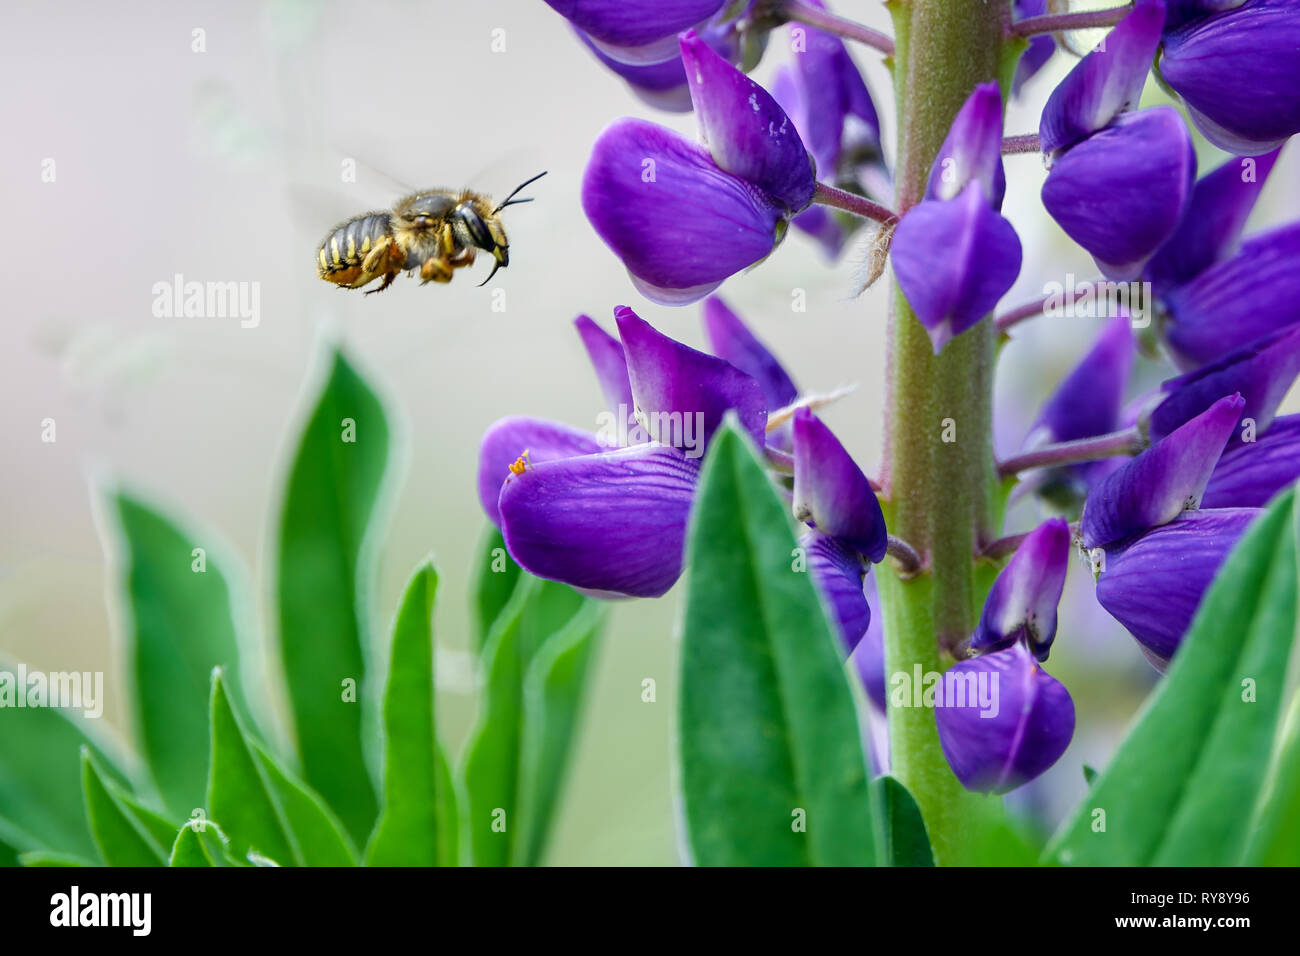 Pollination. Bee flies and collects nectar from a purple lupine. Beautiful picture with blurred background. Stock Photo